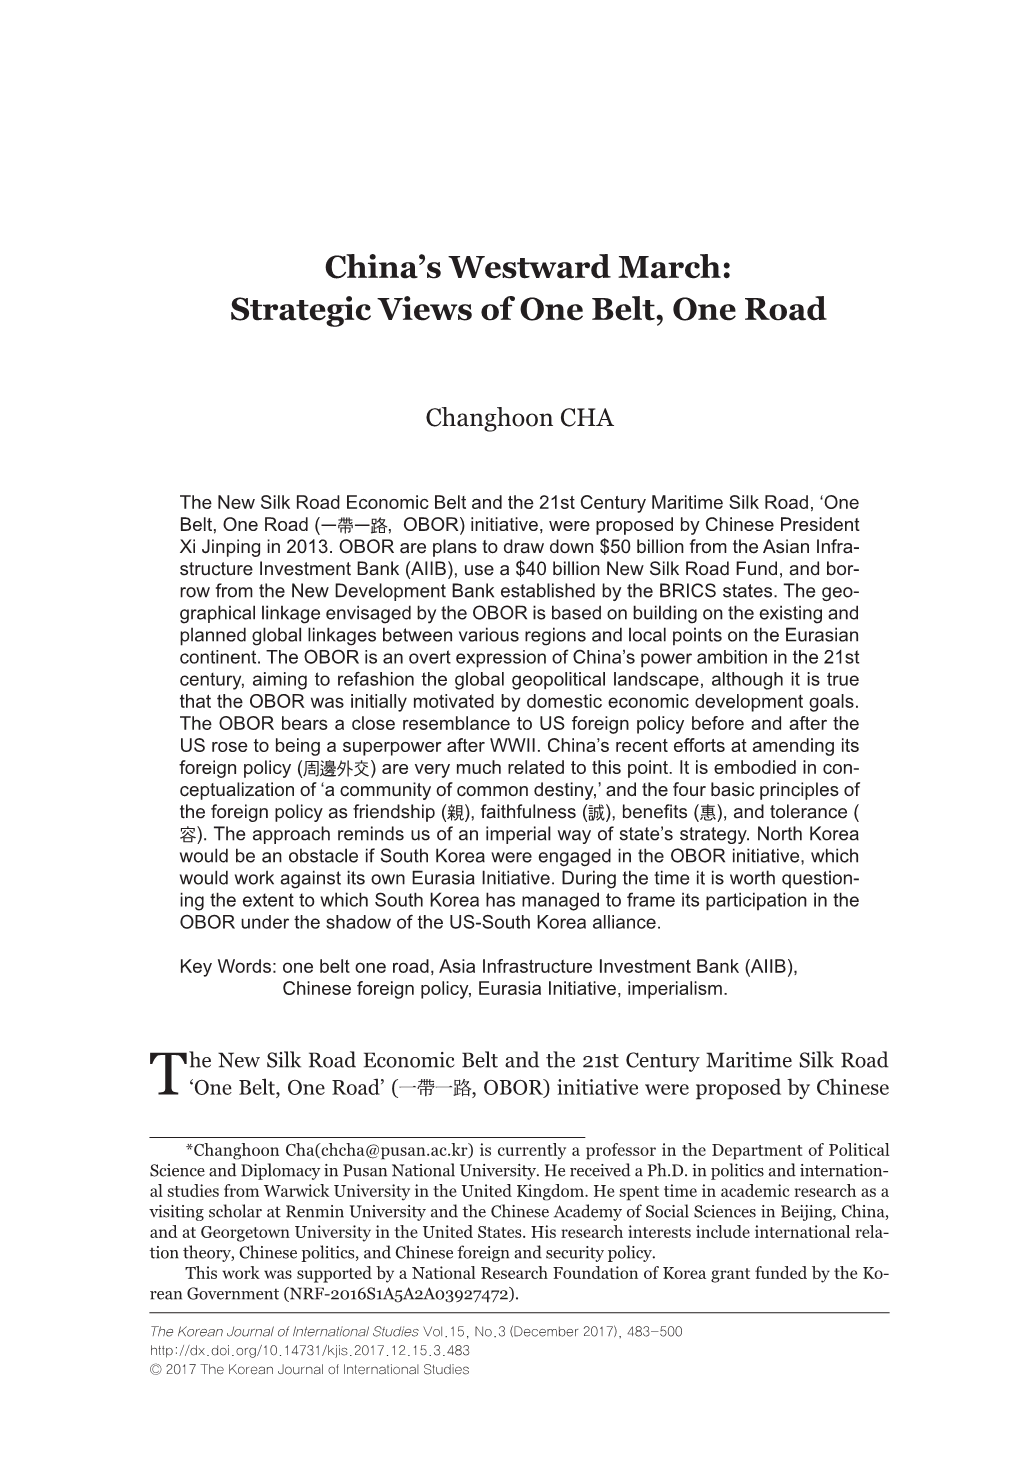 China's Westward March: Strategic Views of One Belt, One Road